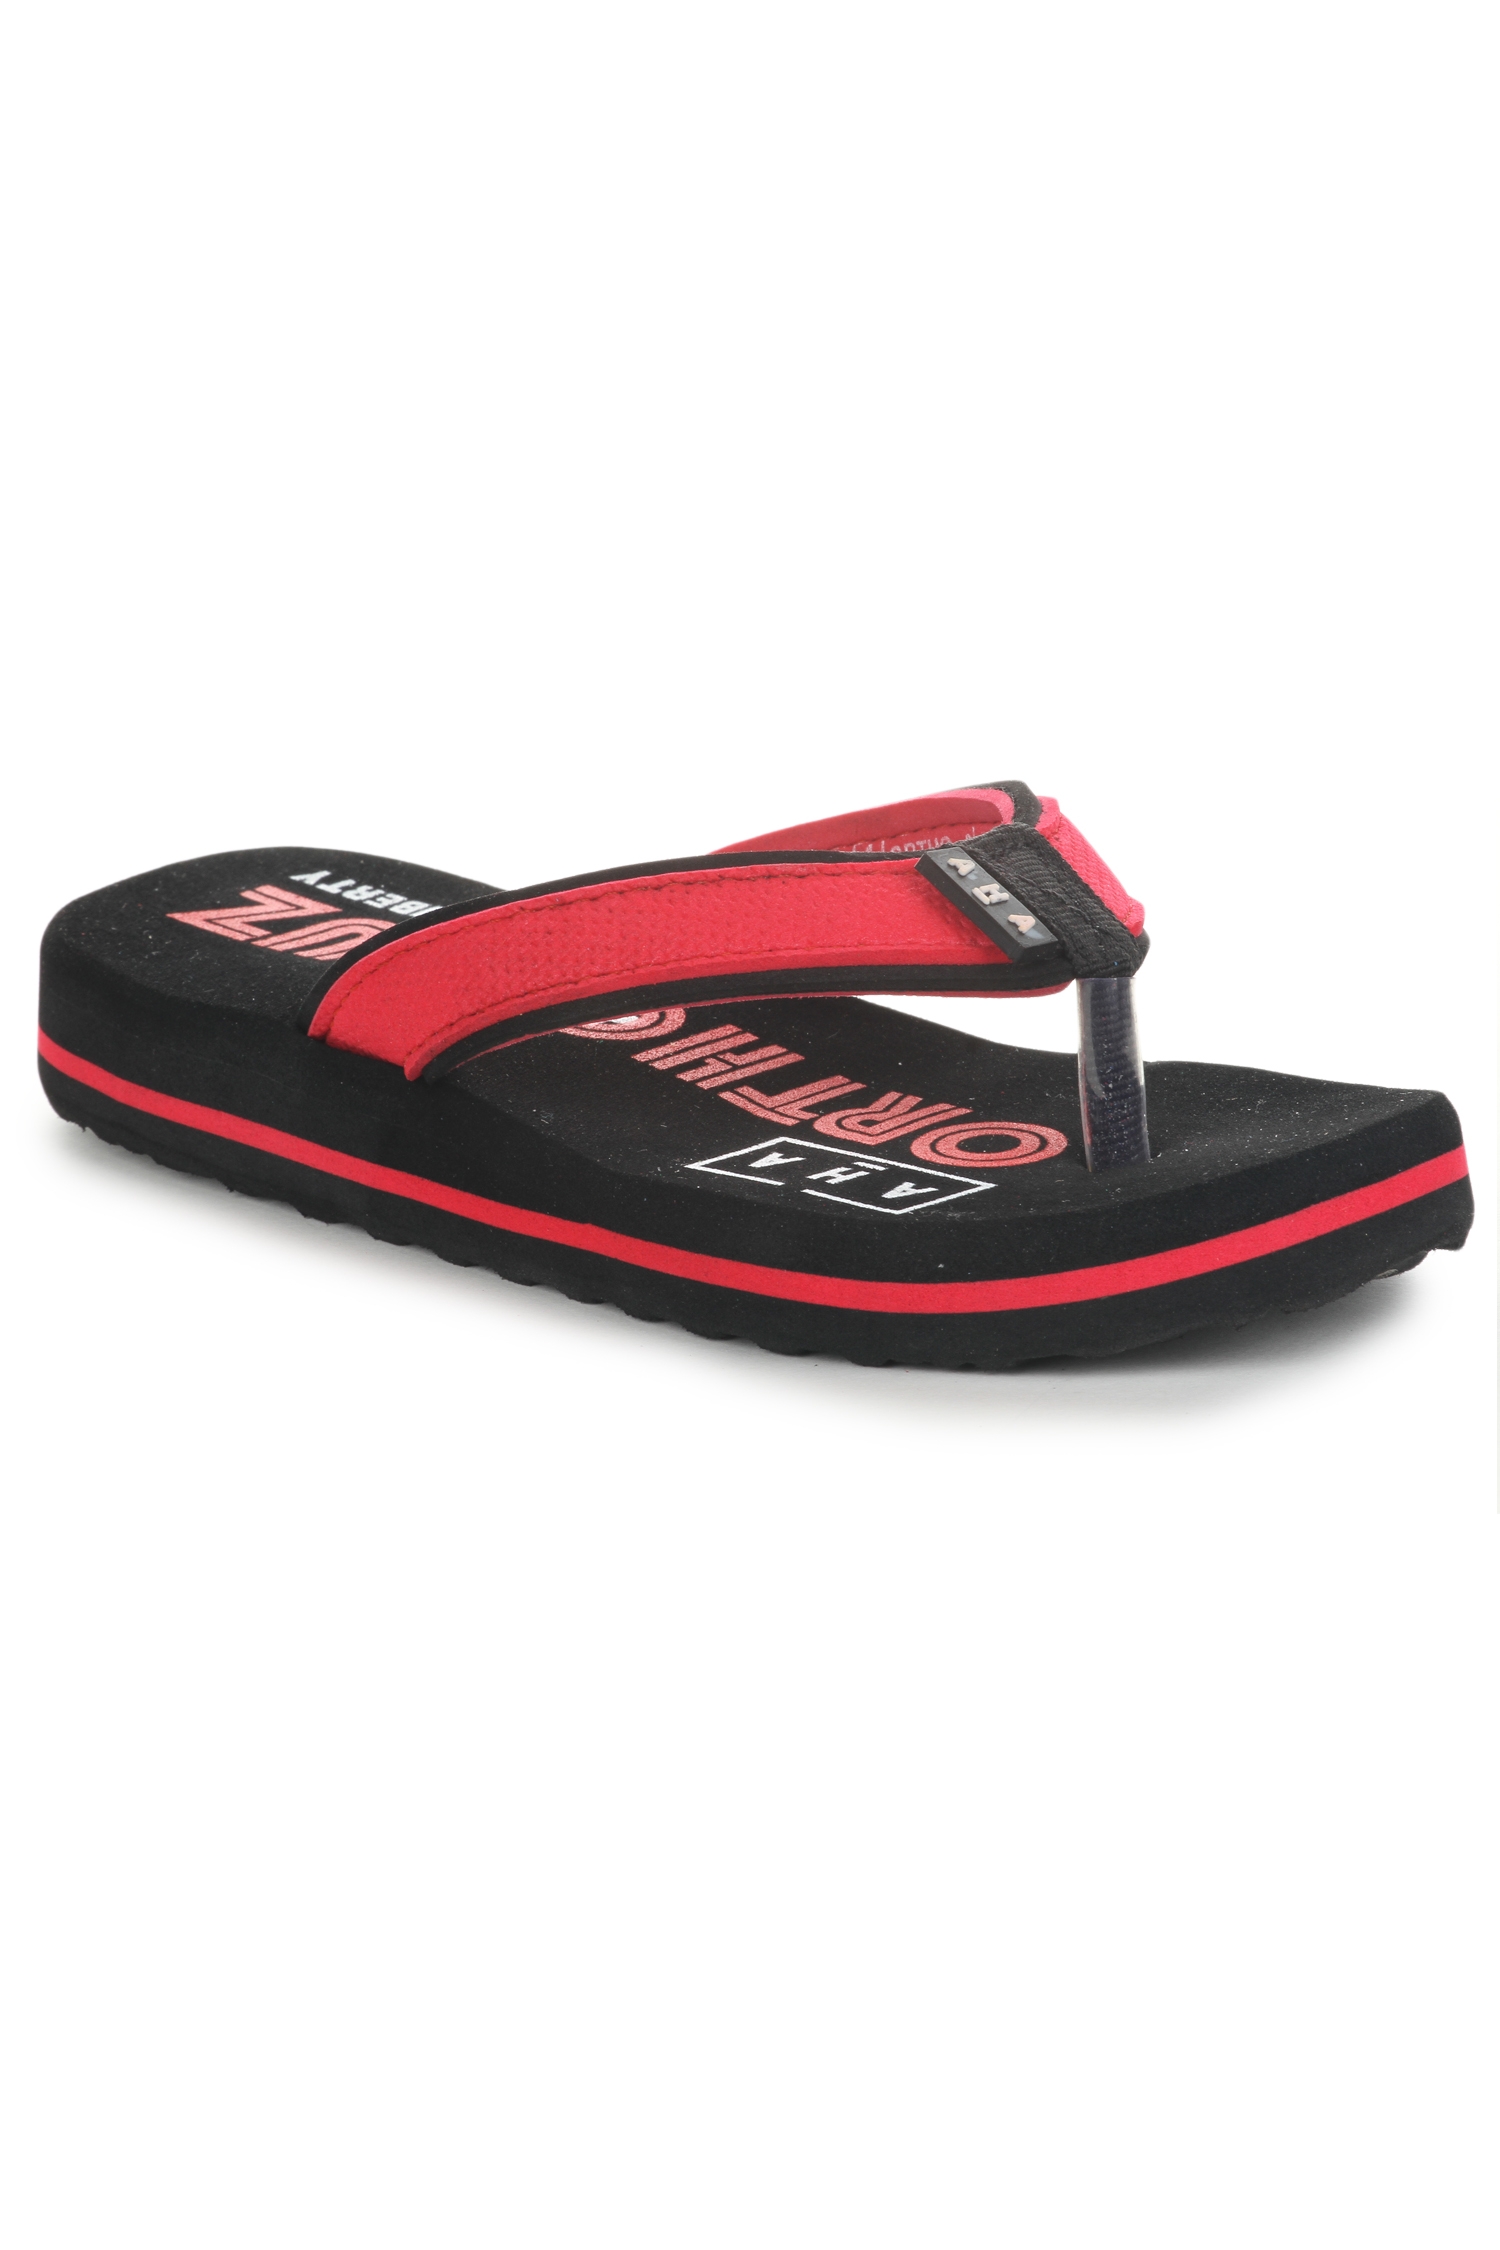 Liberty | Liberty A-HA Red Flip Flops ORTHO-3_Red For - Women